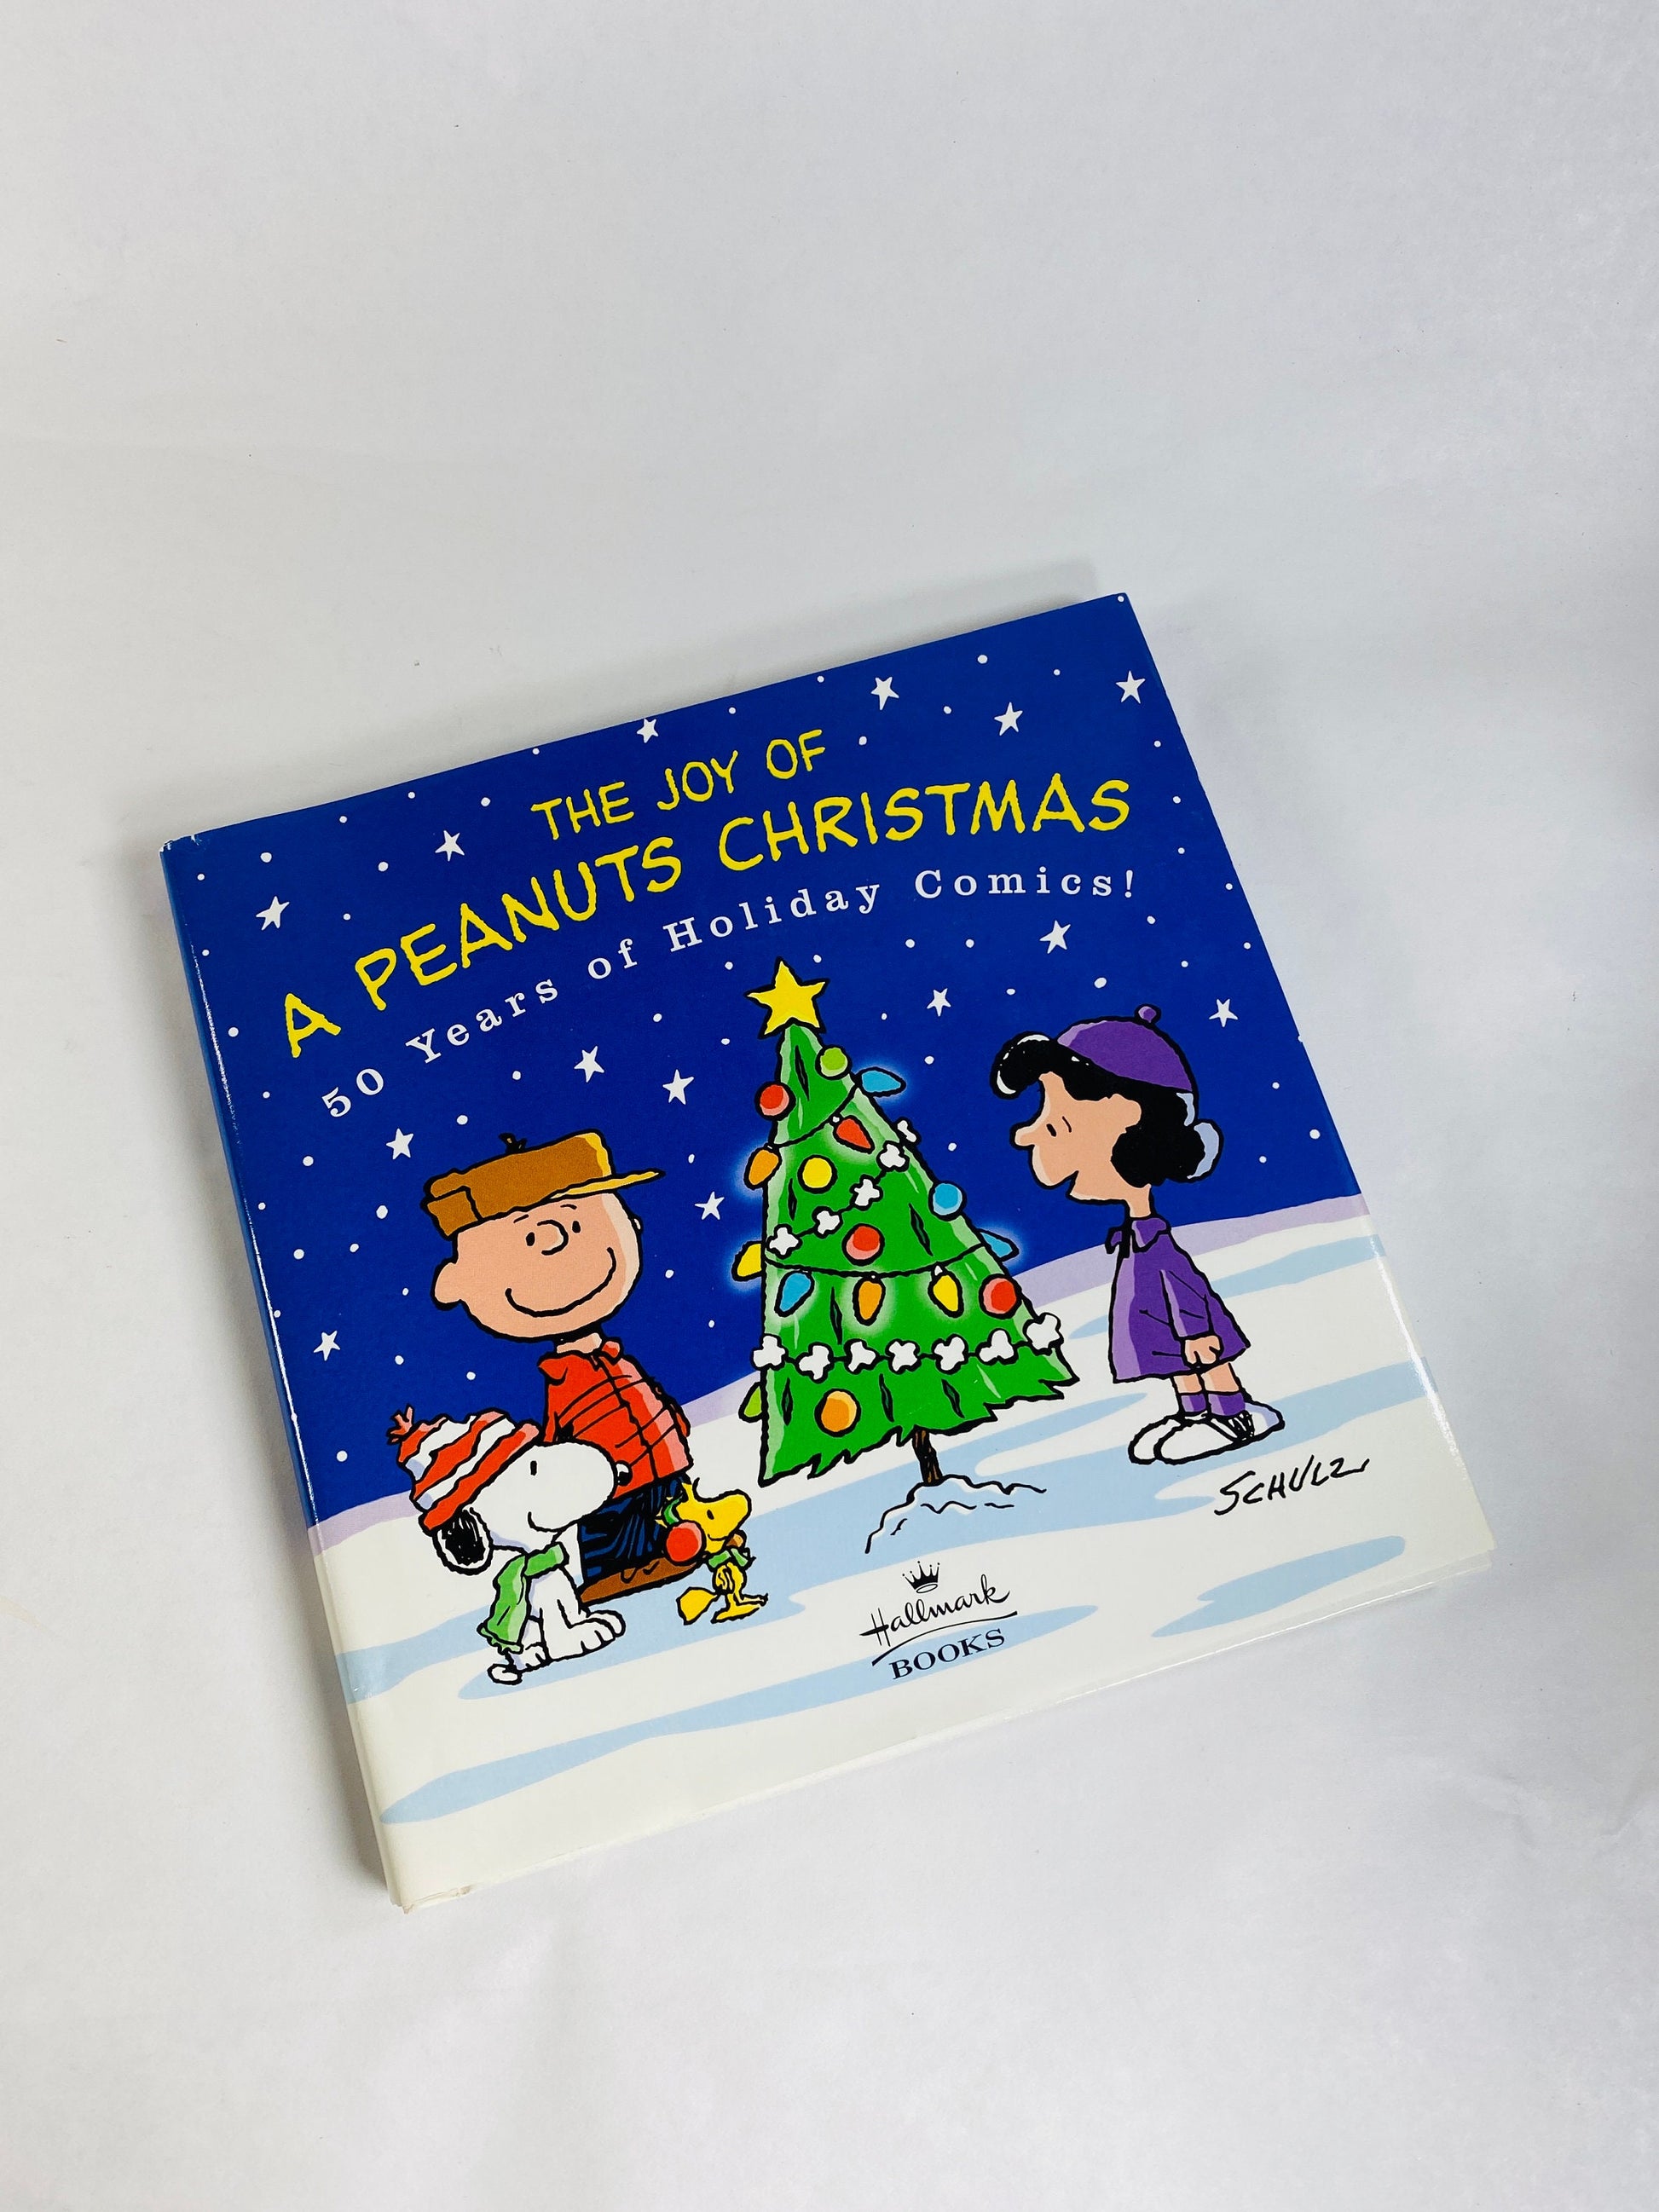 Charlie Brown Christmas vintage book Joy of Peanuts by Charles Schulz. Classic holiday Xmas Children's Book.